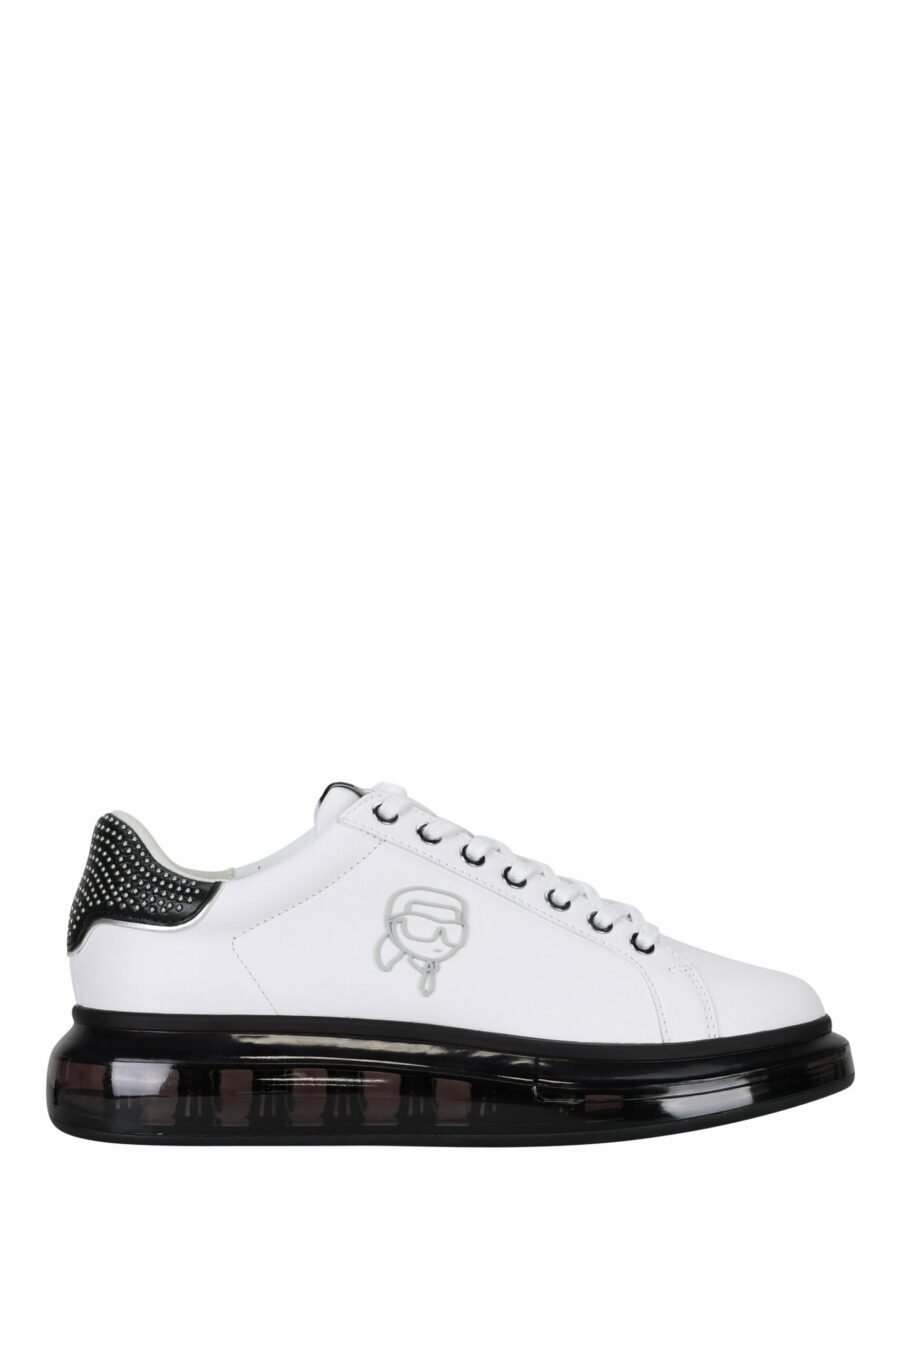 White trainers "kapri fushion" with black sole and logo in outline - 5059529363467 scaled